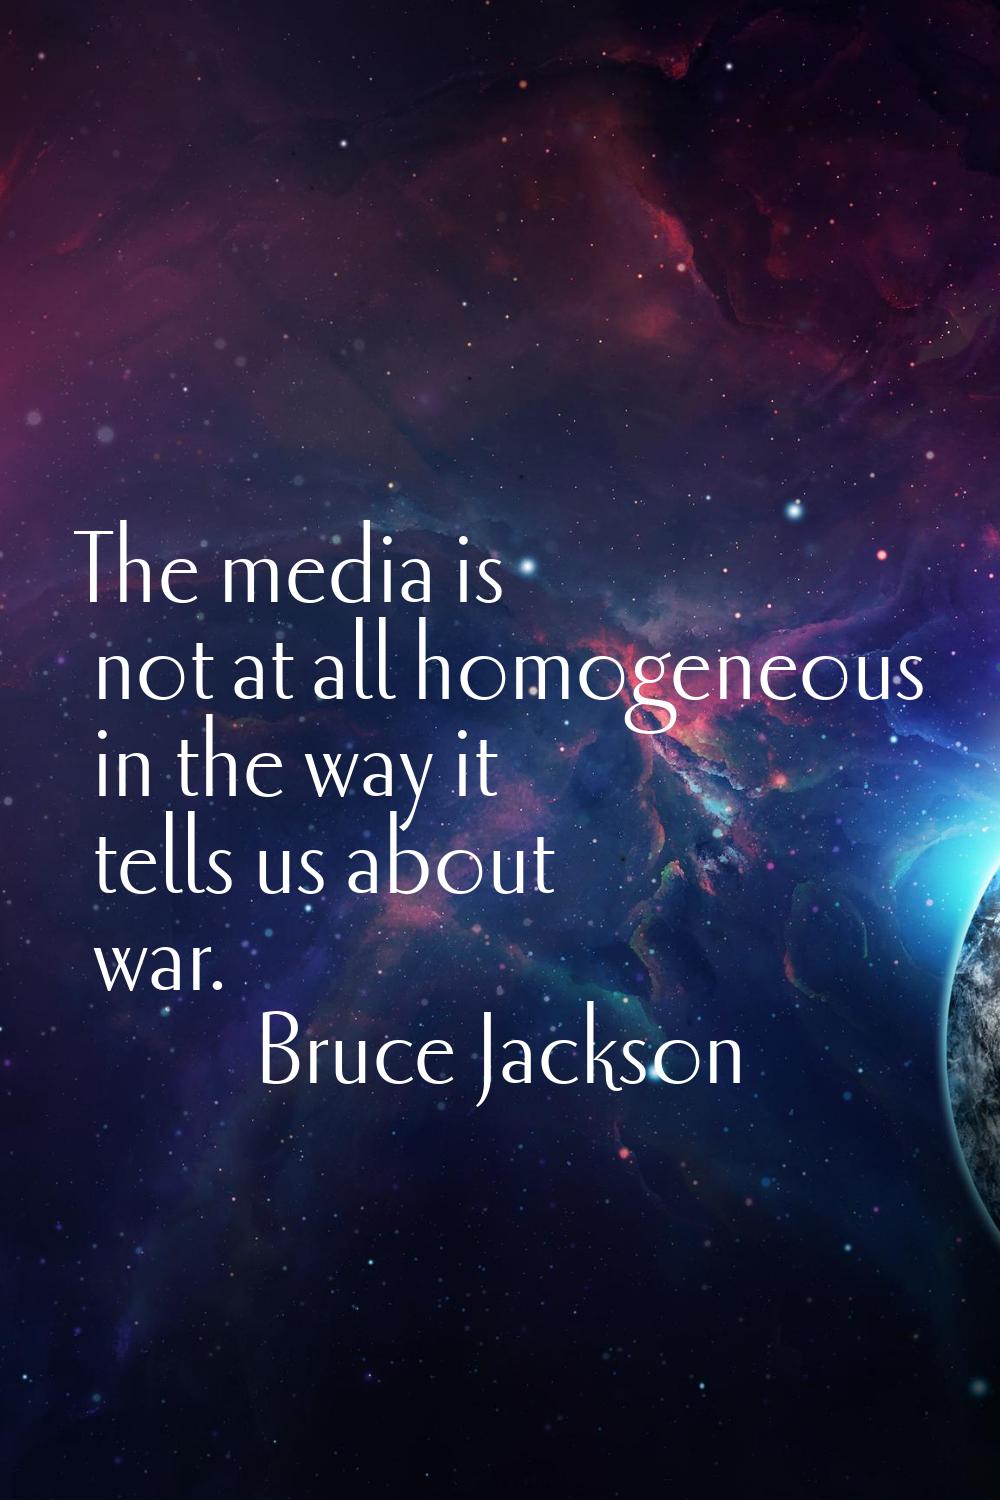 The media is not at all homogeneous in the way it tells us about war.